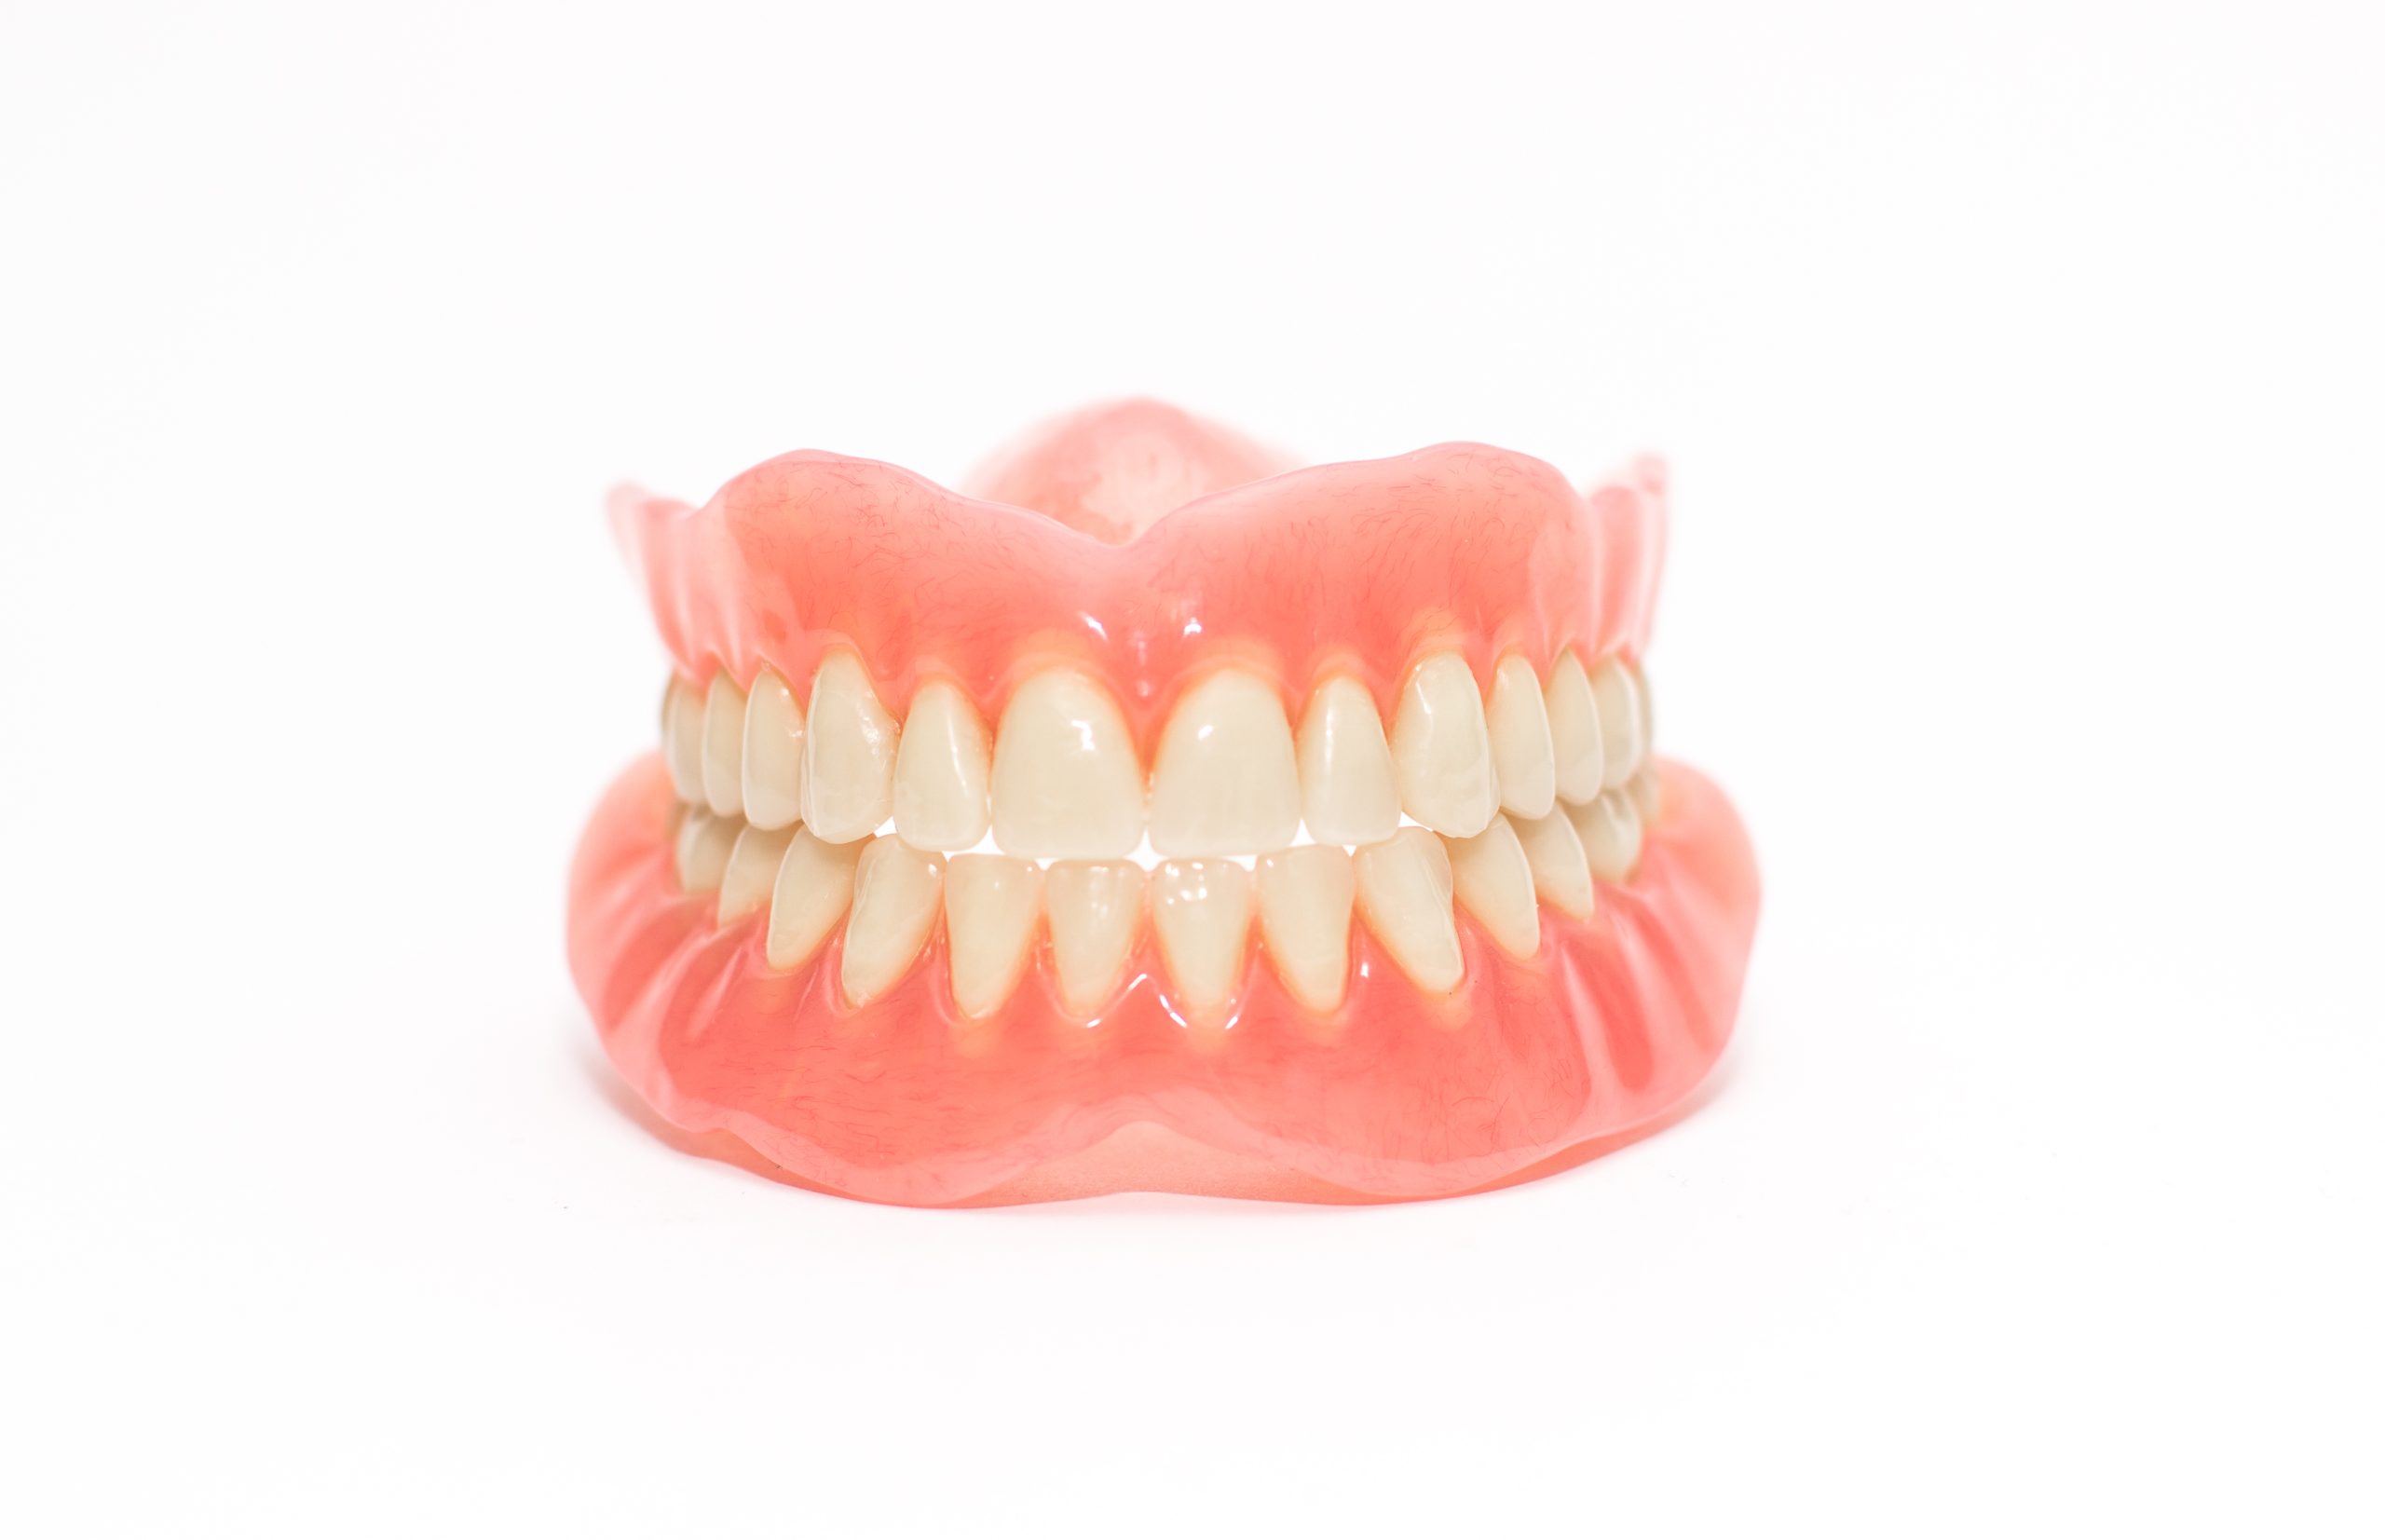 An image of dentures on white background